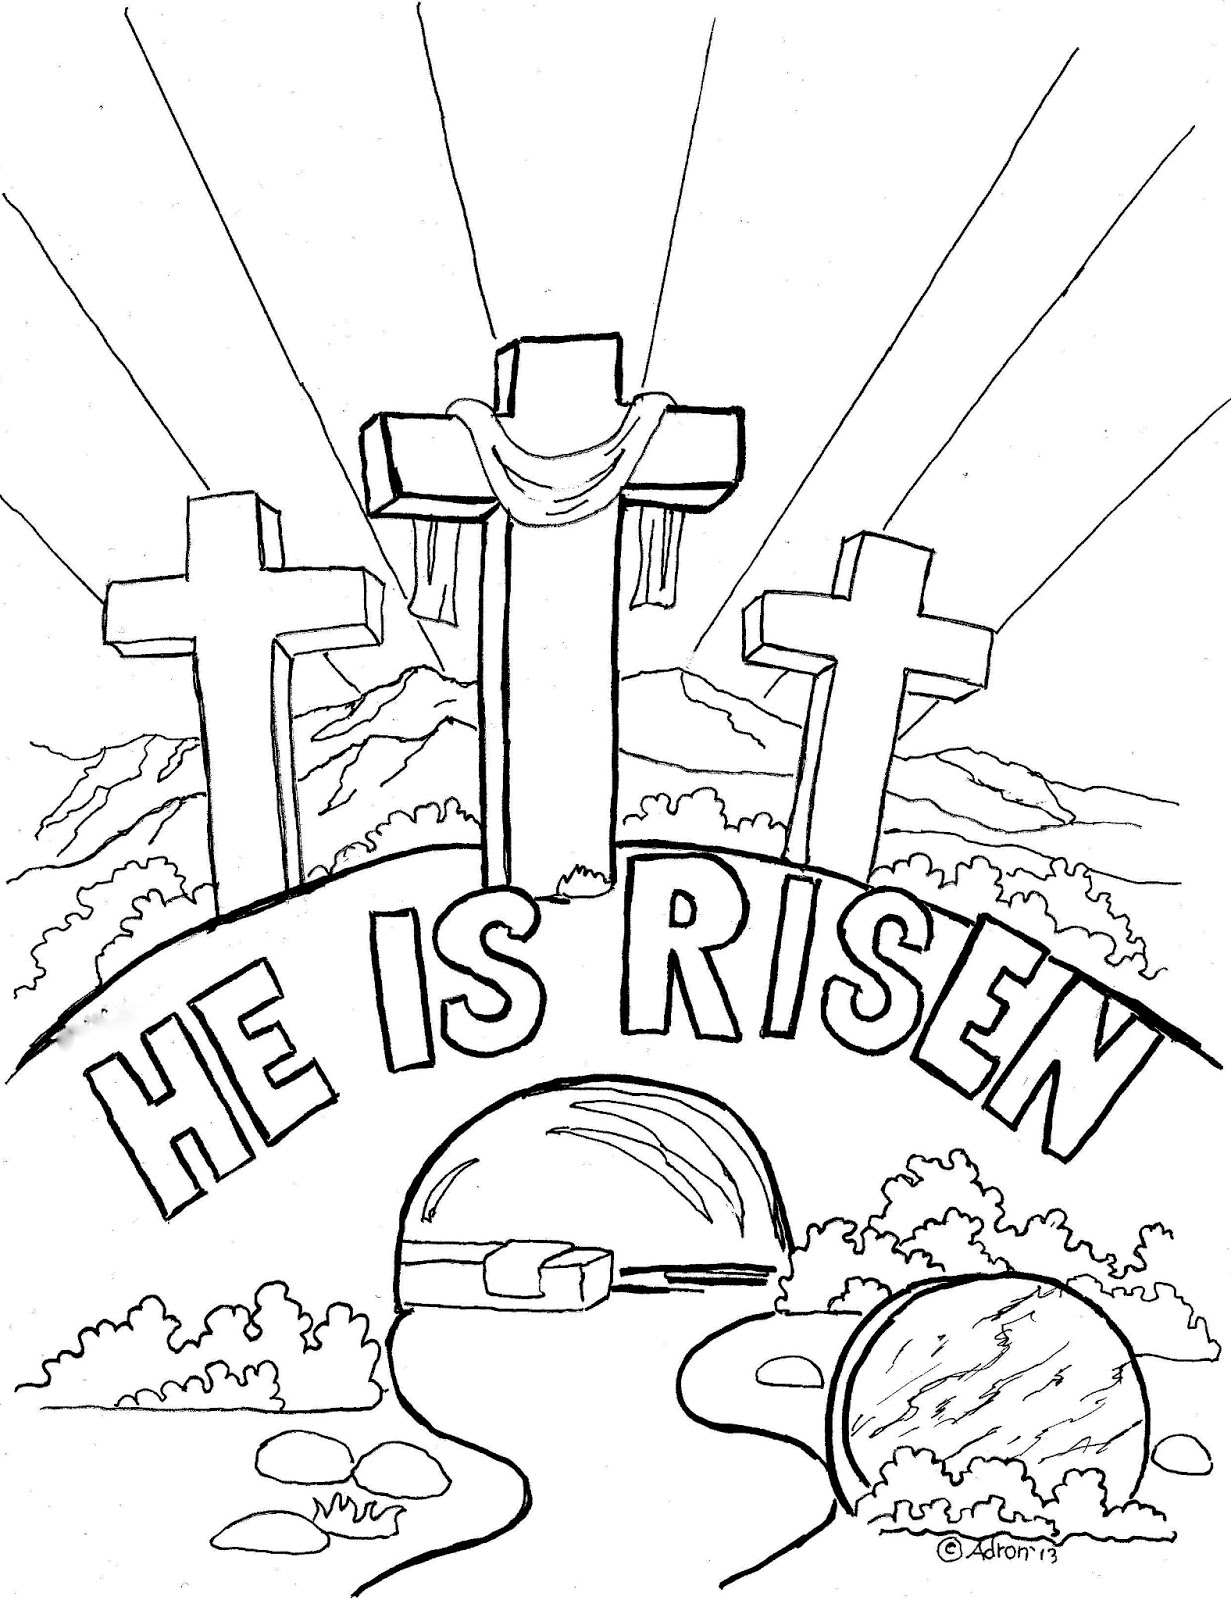 He is risen clipart image color in 